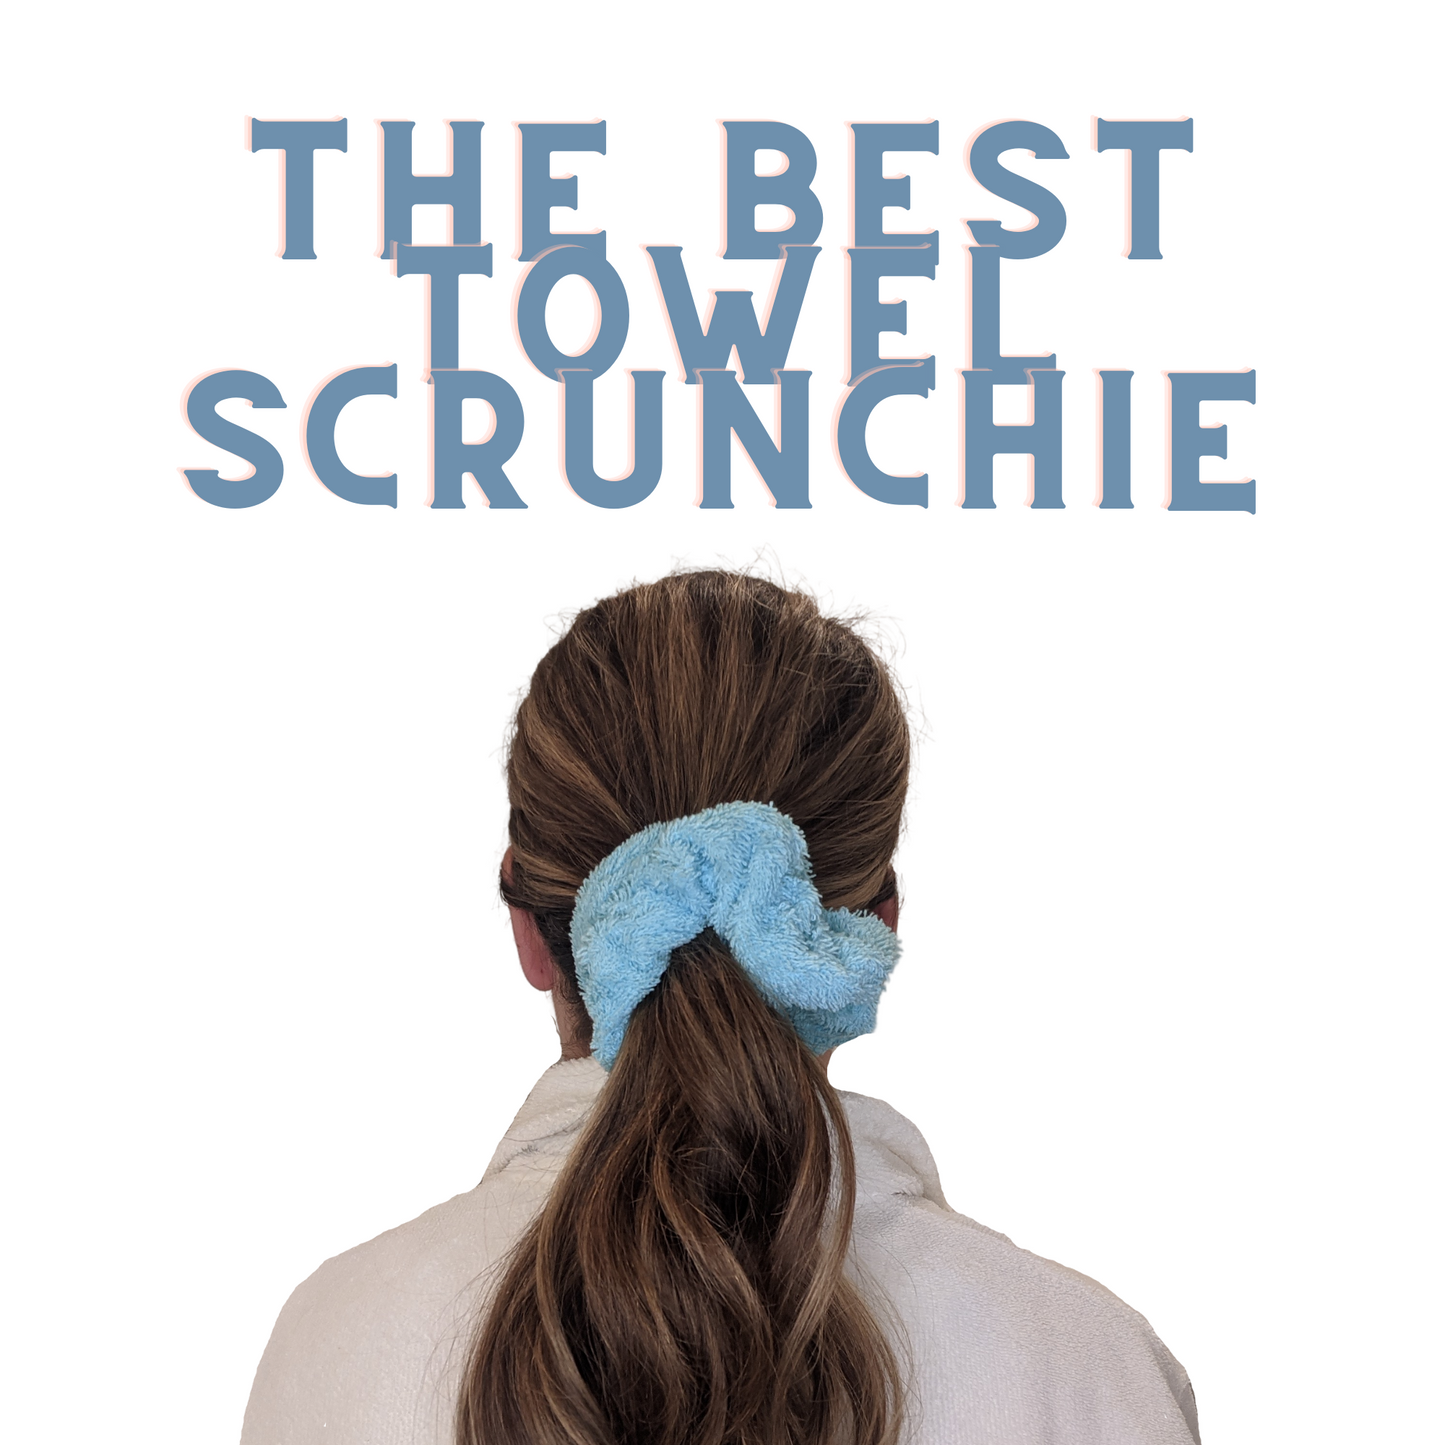 100% cotton towel scrunchie for your hair made in Canada